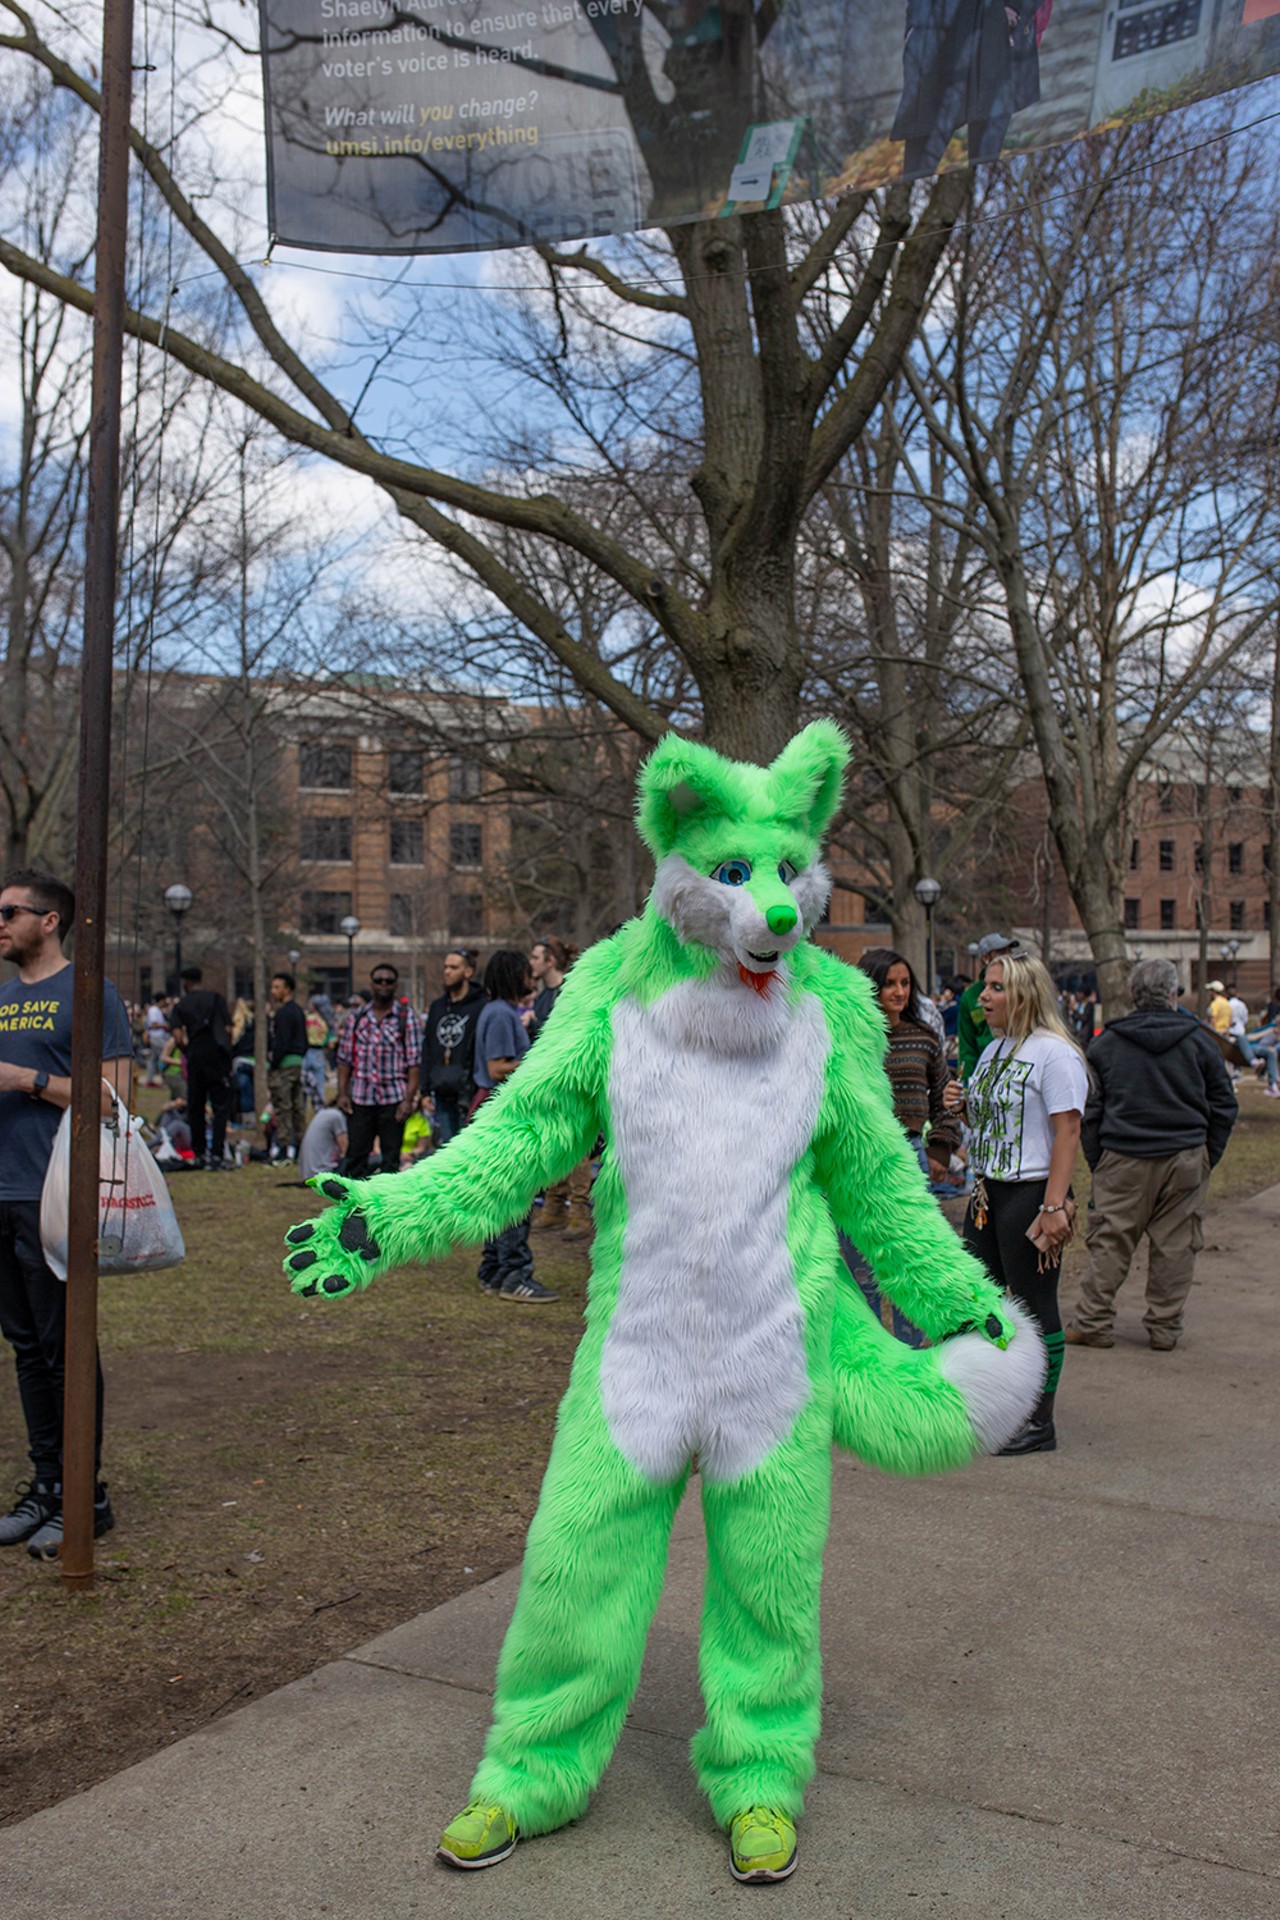 Photos from the 48th annual Hash Bash, the dawn of a new era for marijuana in Michigan